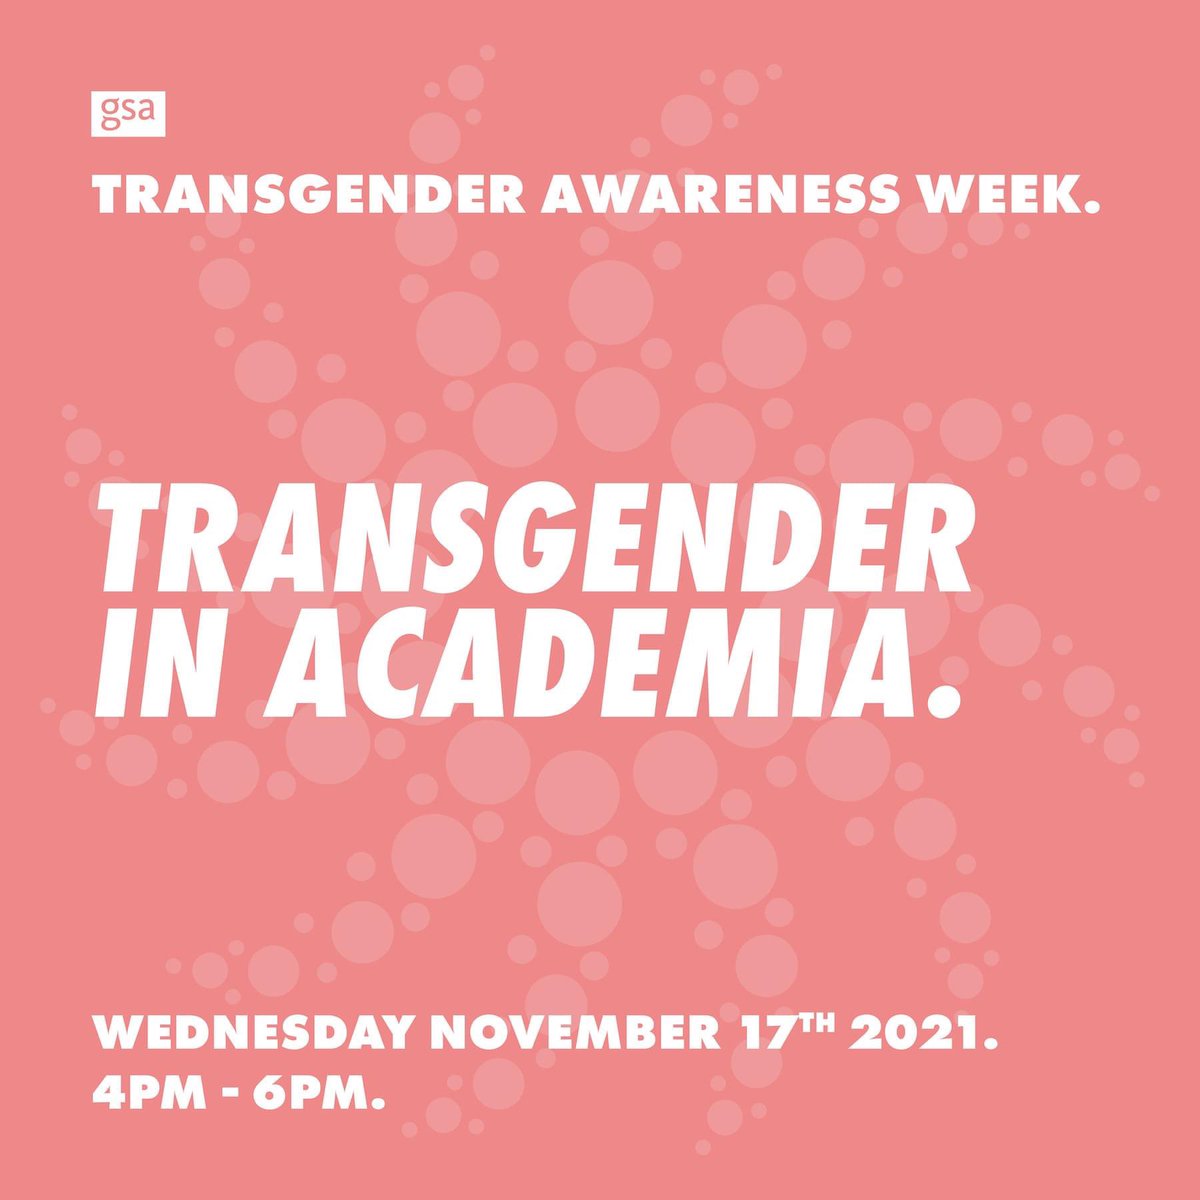 Tomorrow for #TransAwarenessWeek the @UniMelb workshop is a spotlight on #TransResearch with @SavZwickl and I, together with @georgtamm and Dr Asiel Adan Sanchez. 4-6pm AEDT. Register👉 bit.ly/3ovmaeR